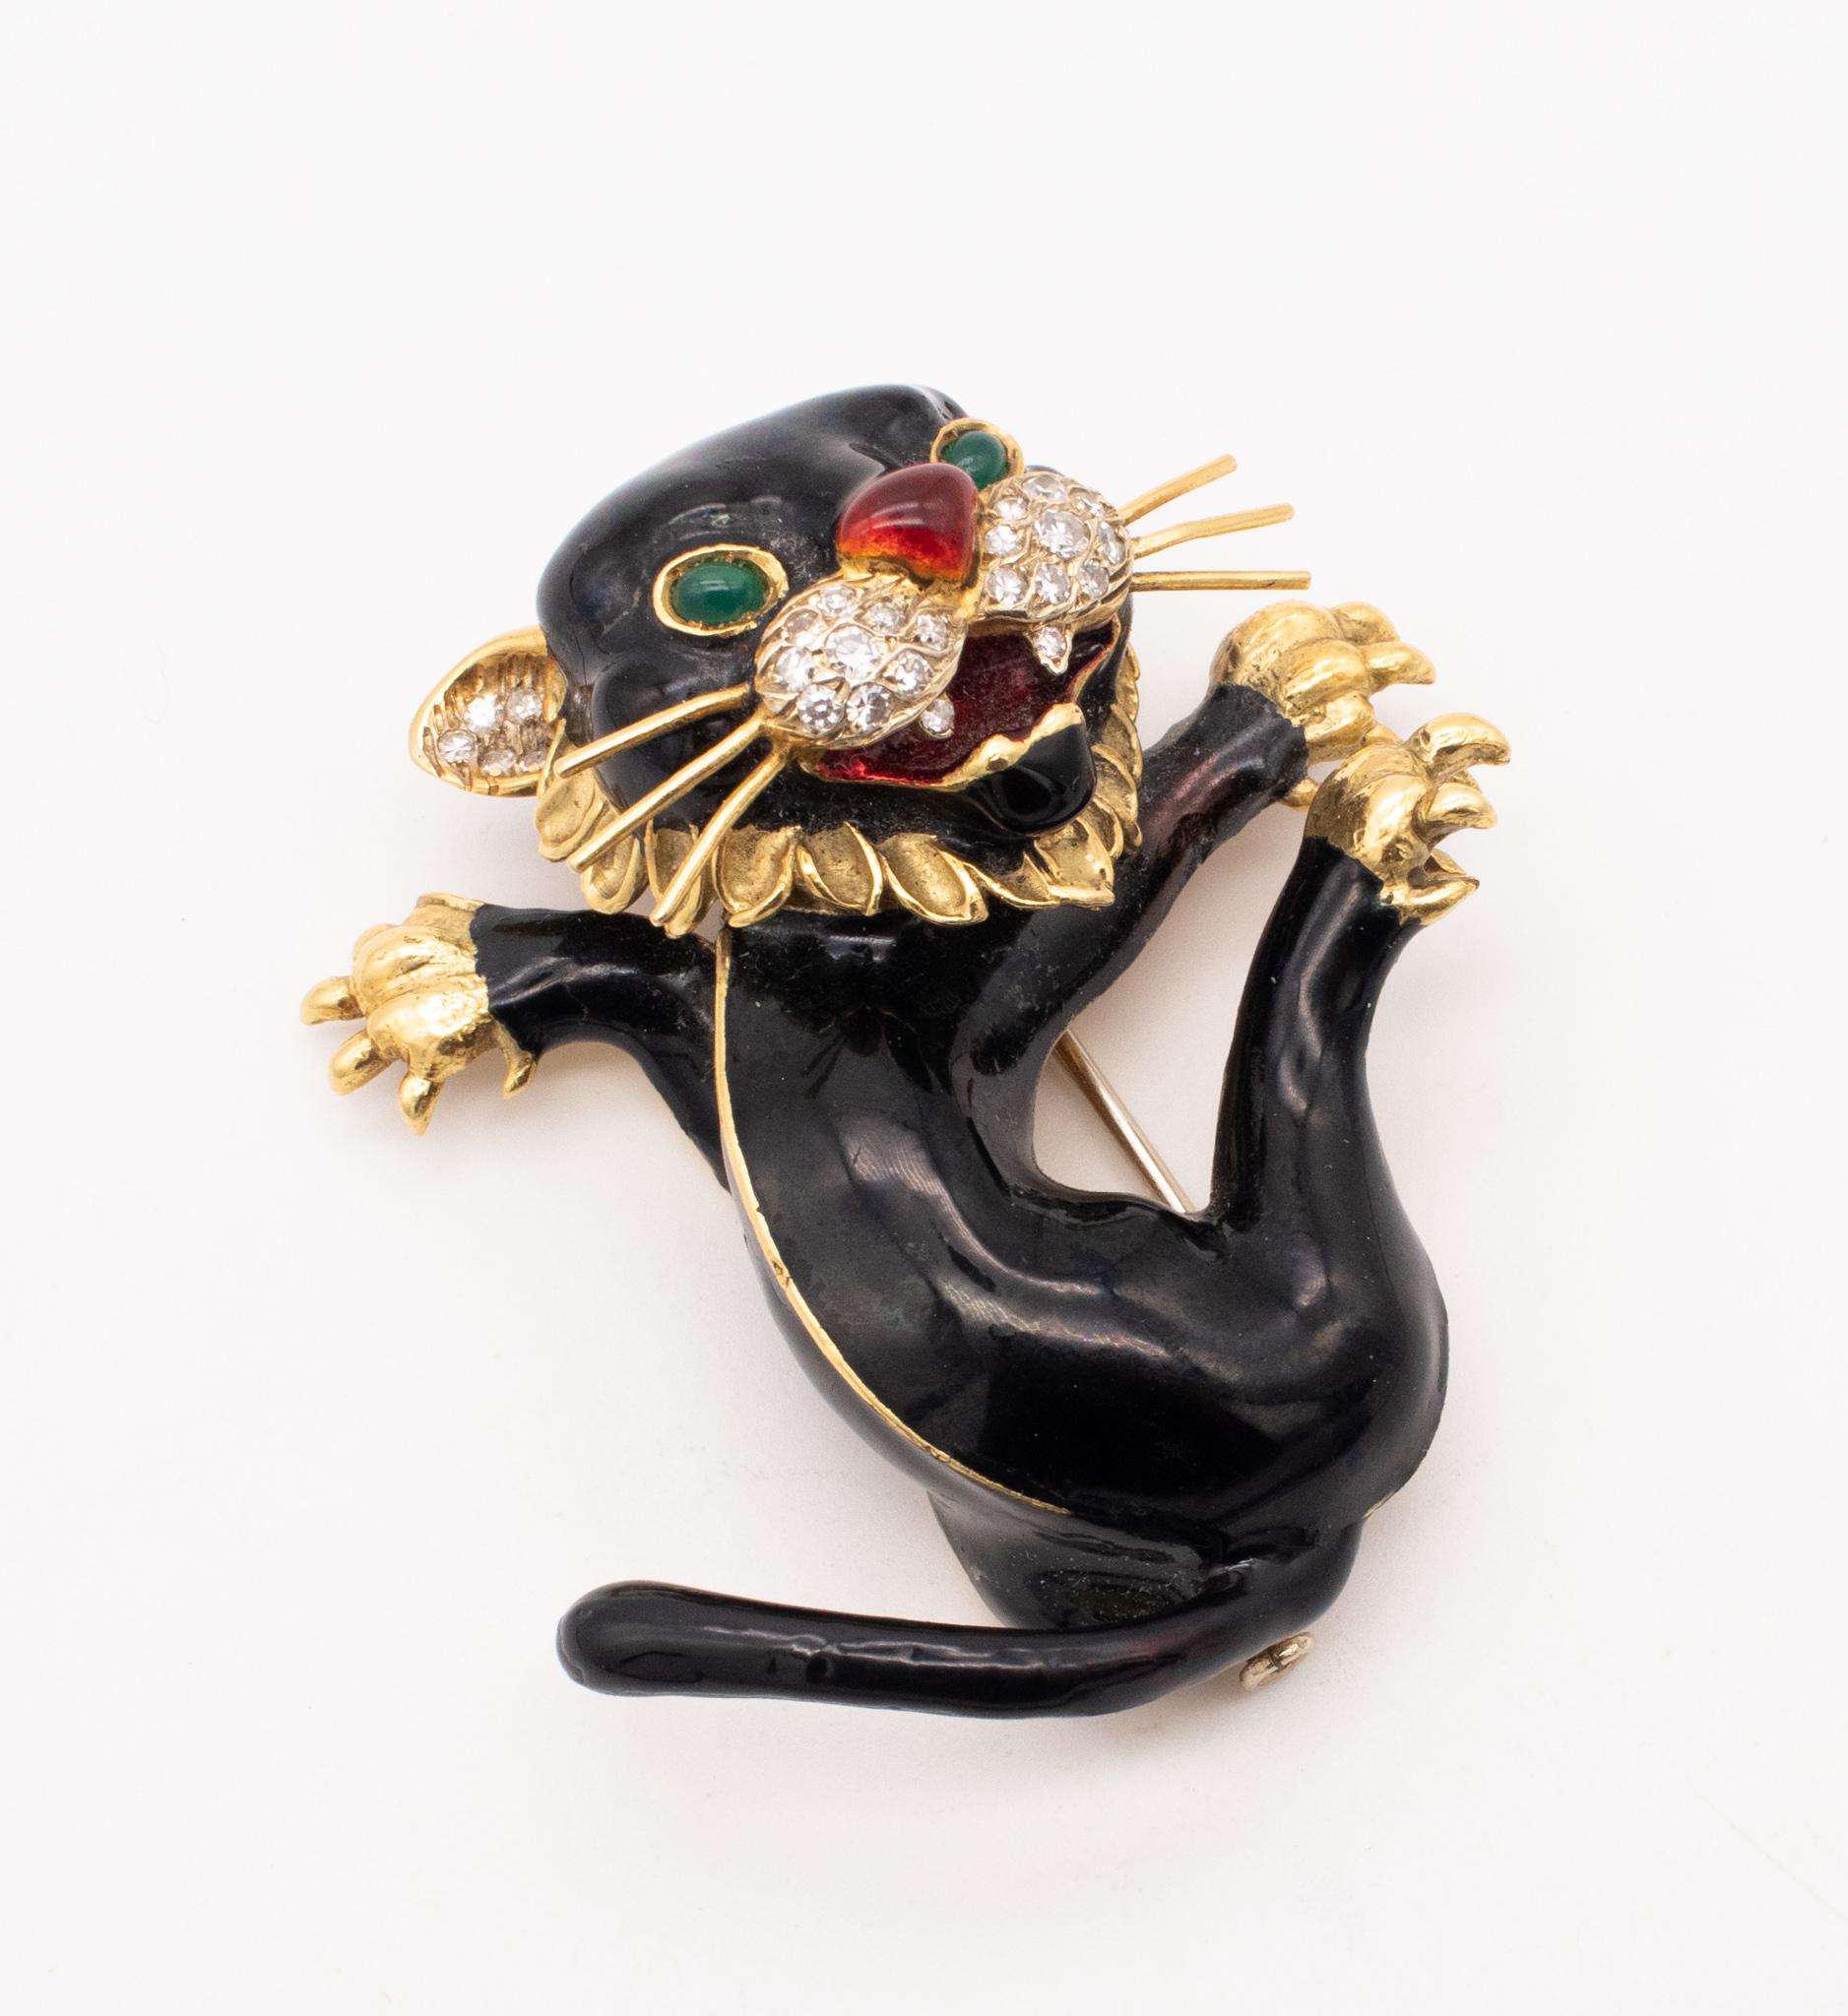 Frascarolo 1960 Italy 18Kt Gold Black Panther Brooch Enamel 1.35 Ctw Diamonds In Excellent Condition For Sale In Miami, FL